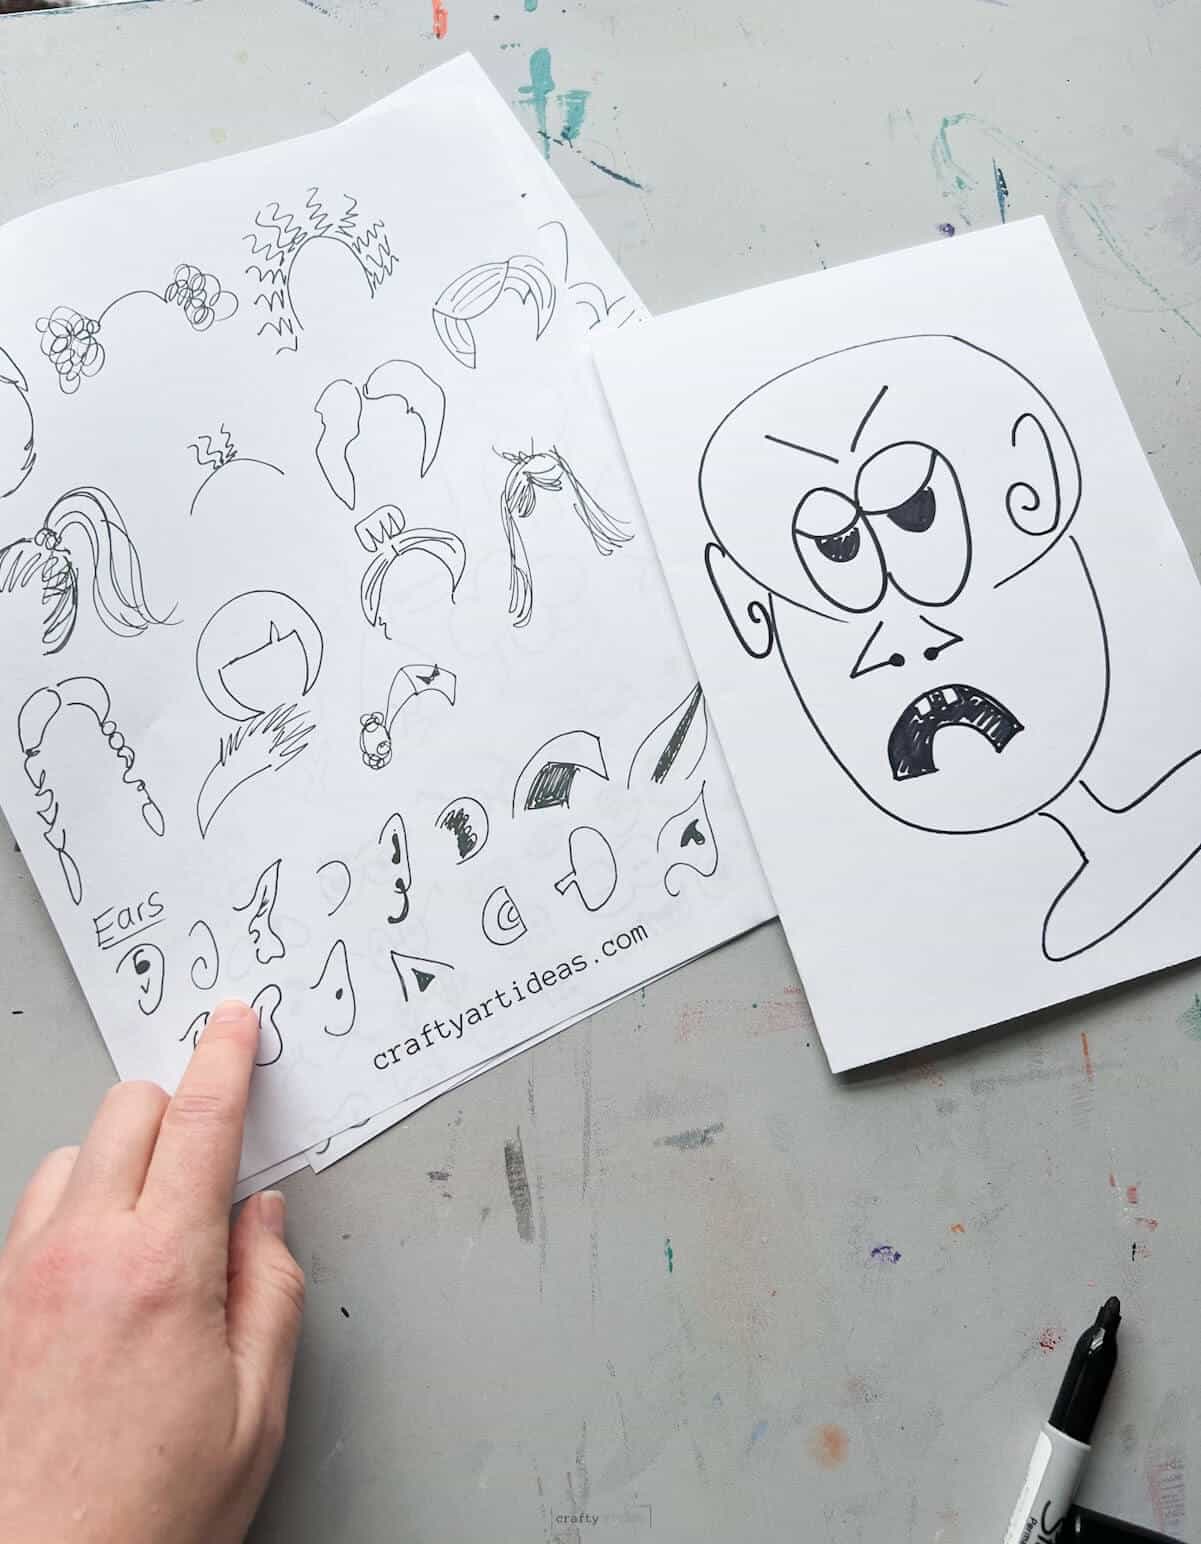 hand pointing to ears with cartoon head drawing with same ears.